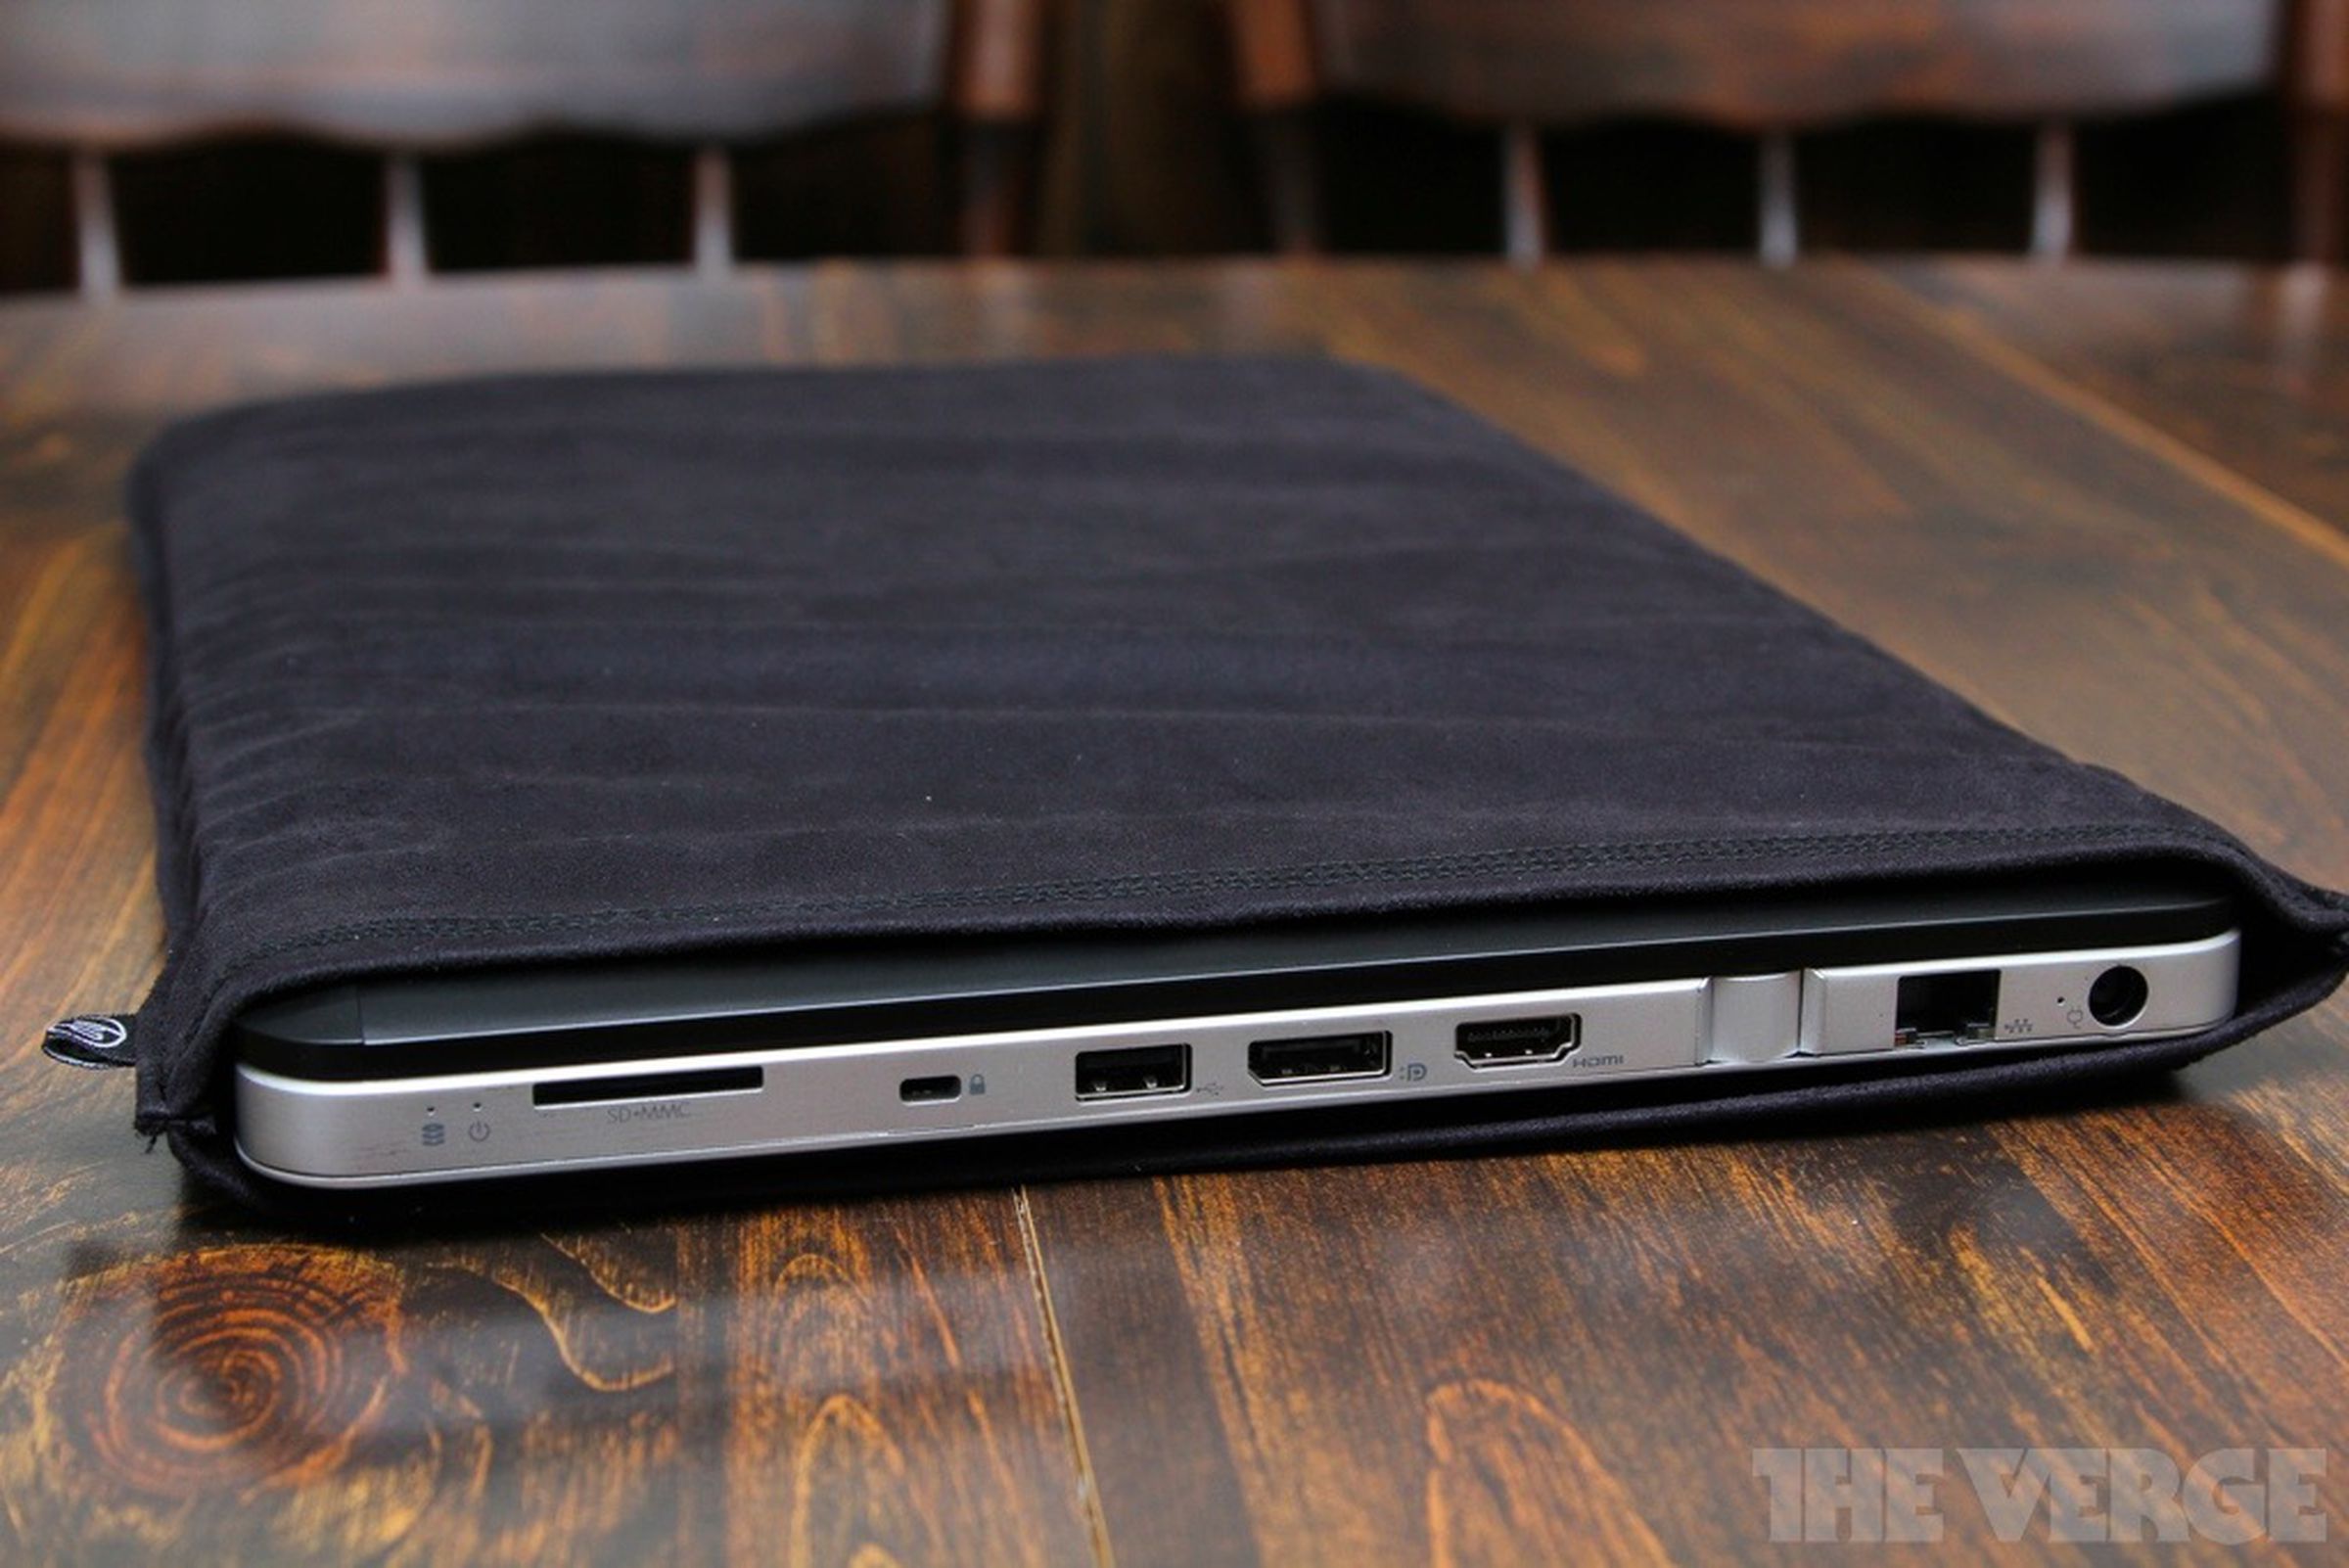 HP Envy 15 (late 2011) review pictures